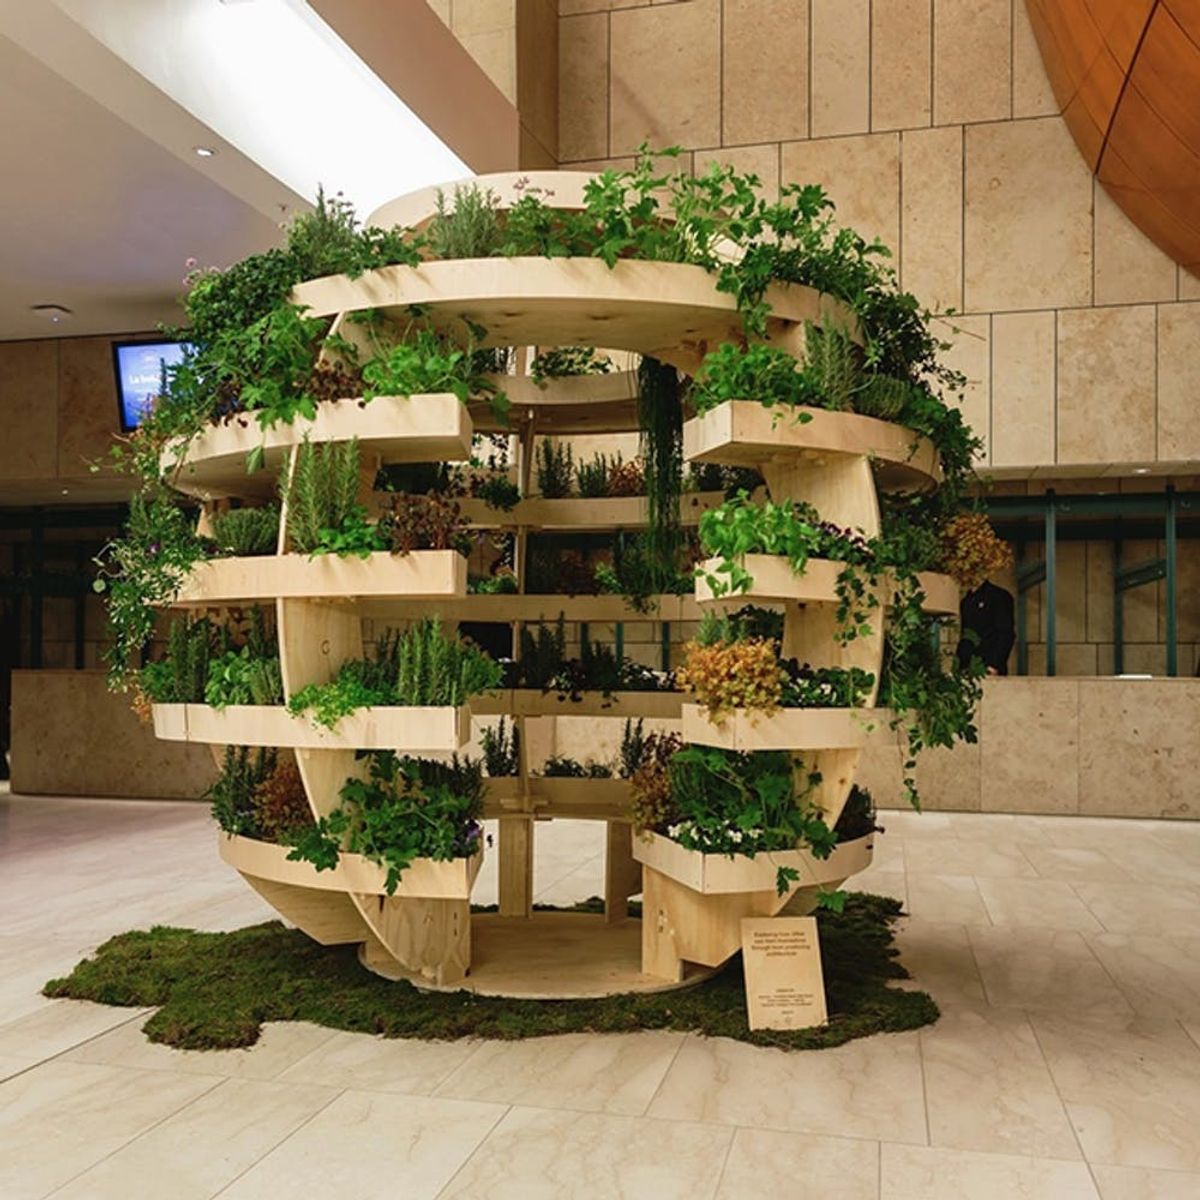 Thanks to IKEA, You Can Now Build the Urban Garden of Your Dreams